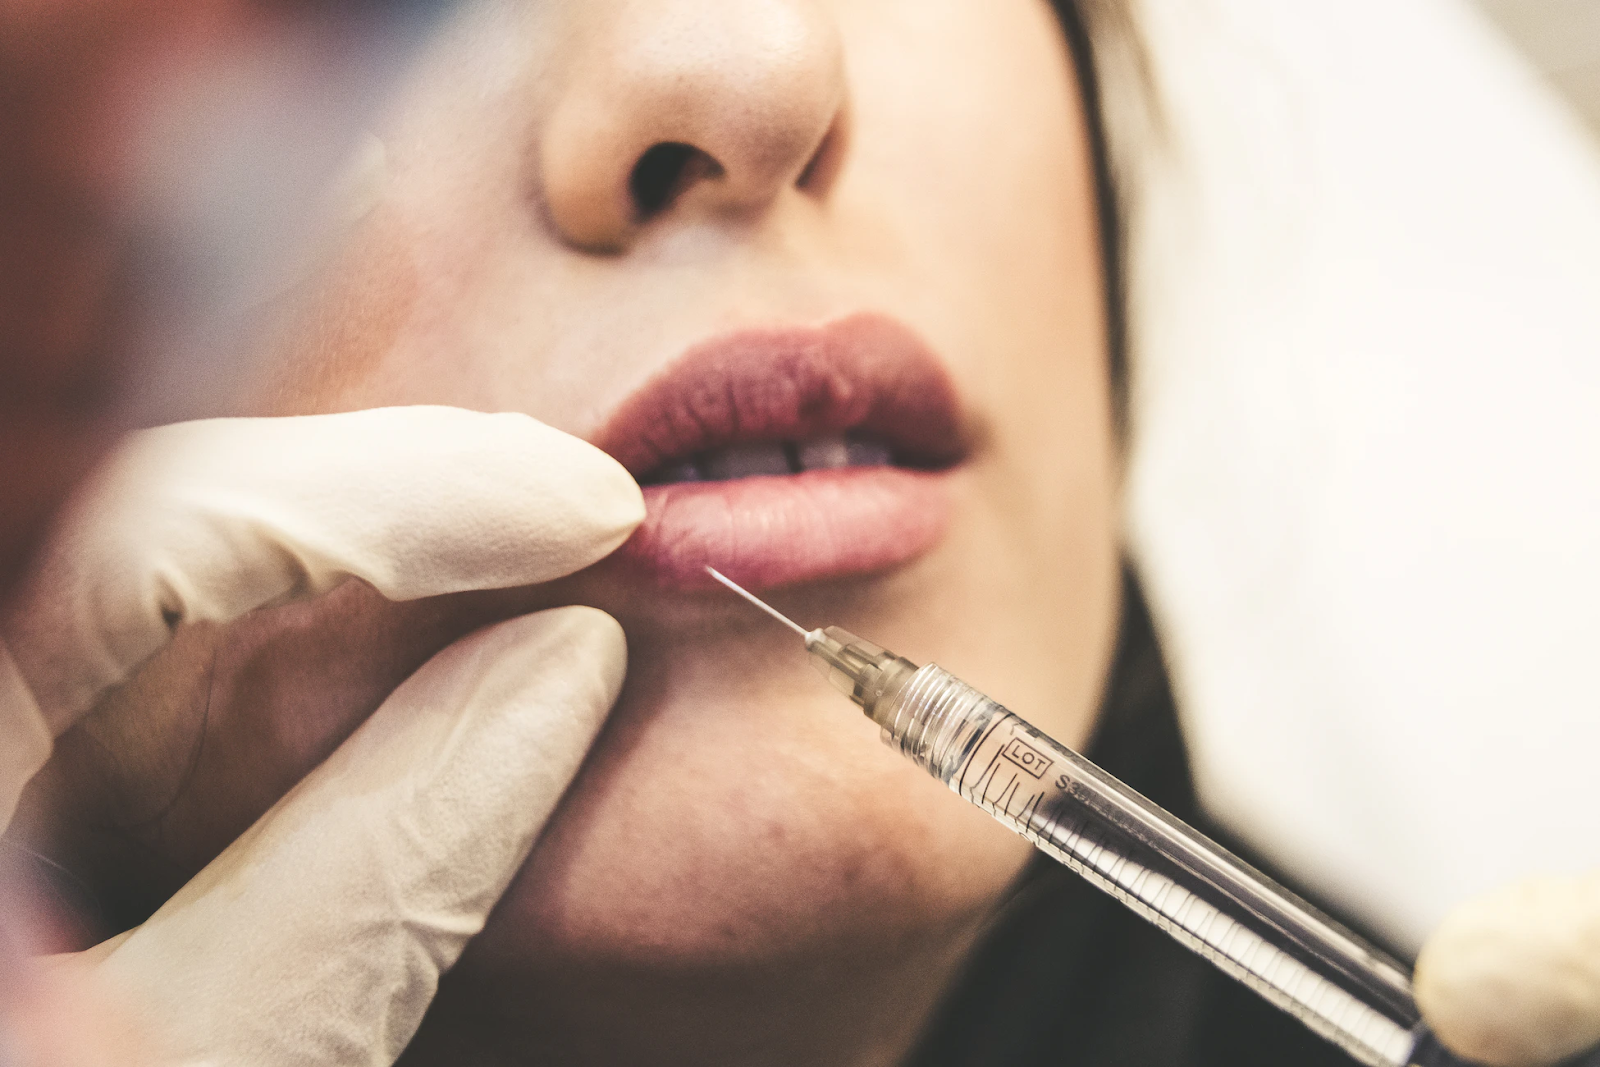 Botox: The Pros And Cons